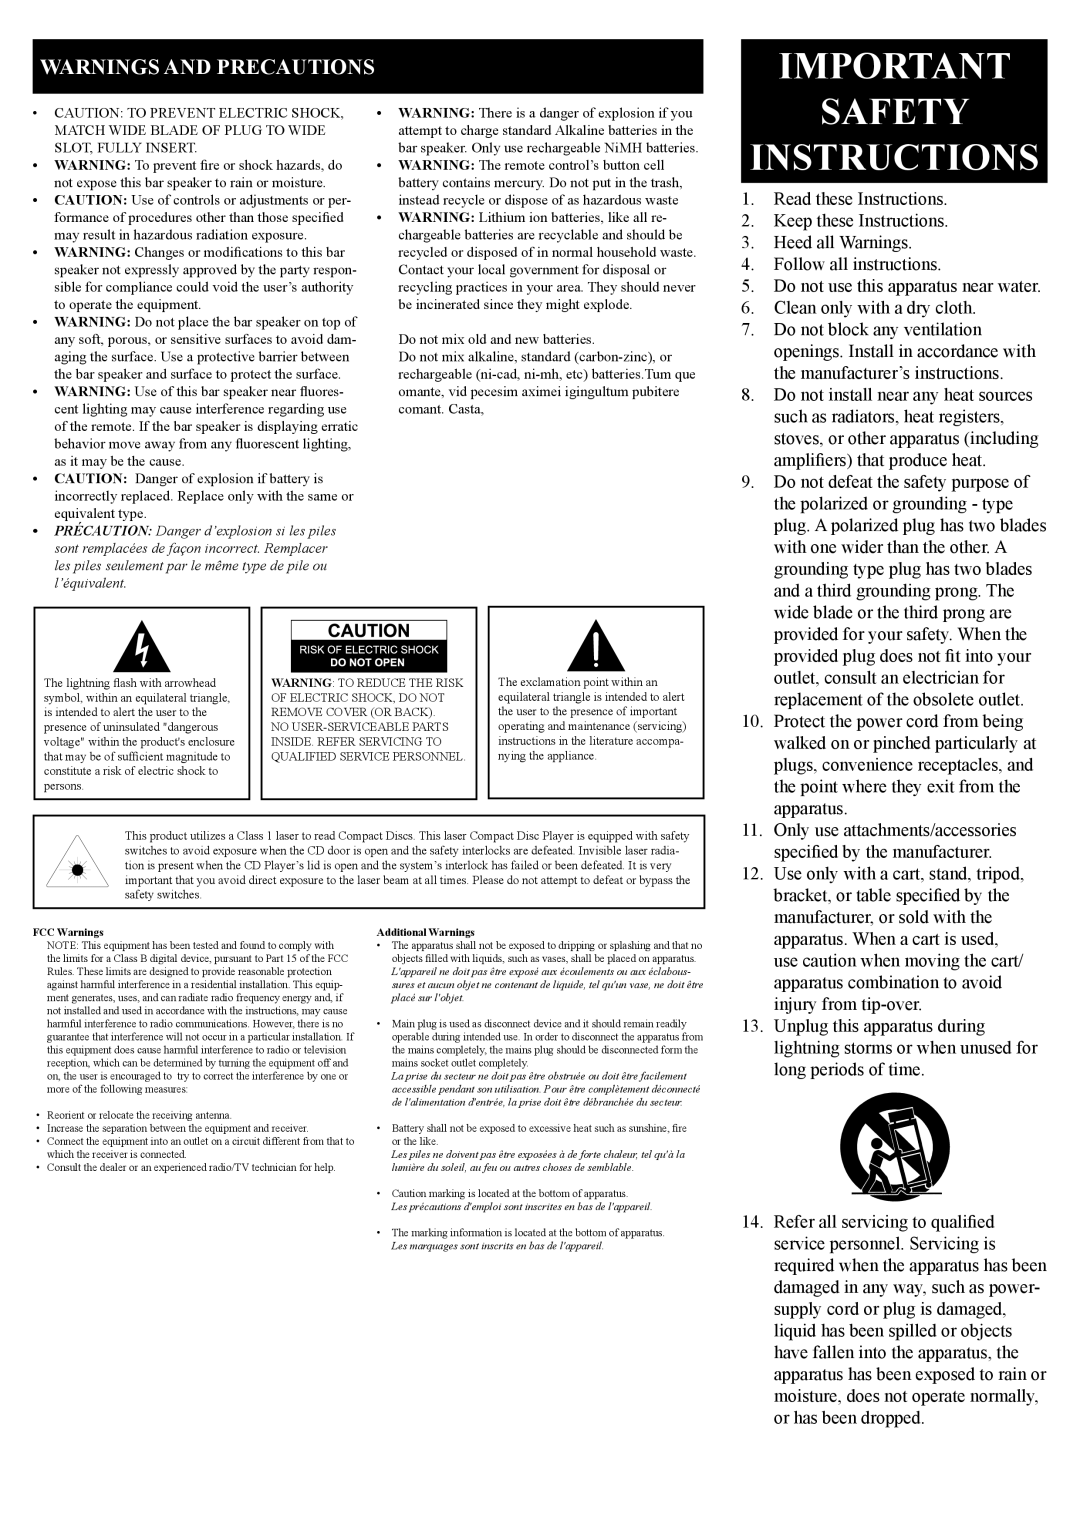 iLive IT209B manual Warnings And Precautions, Safety Instructions 